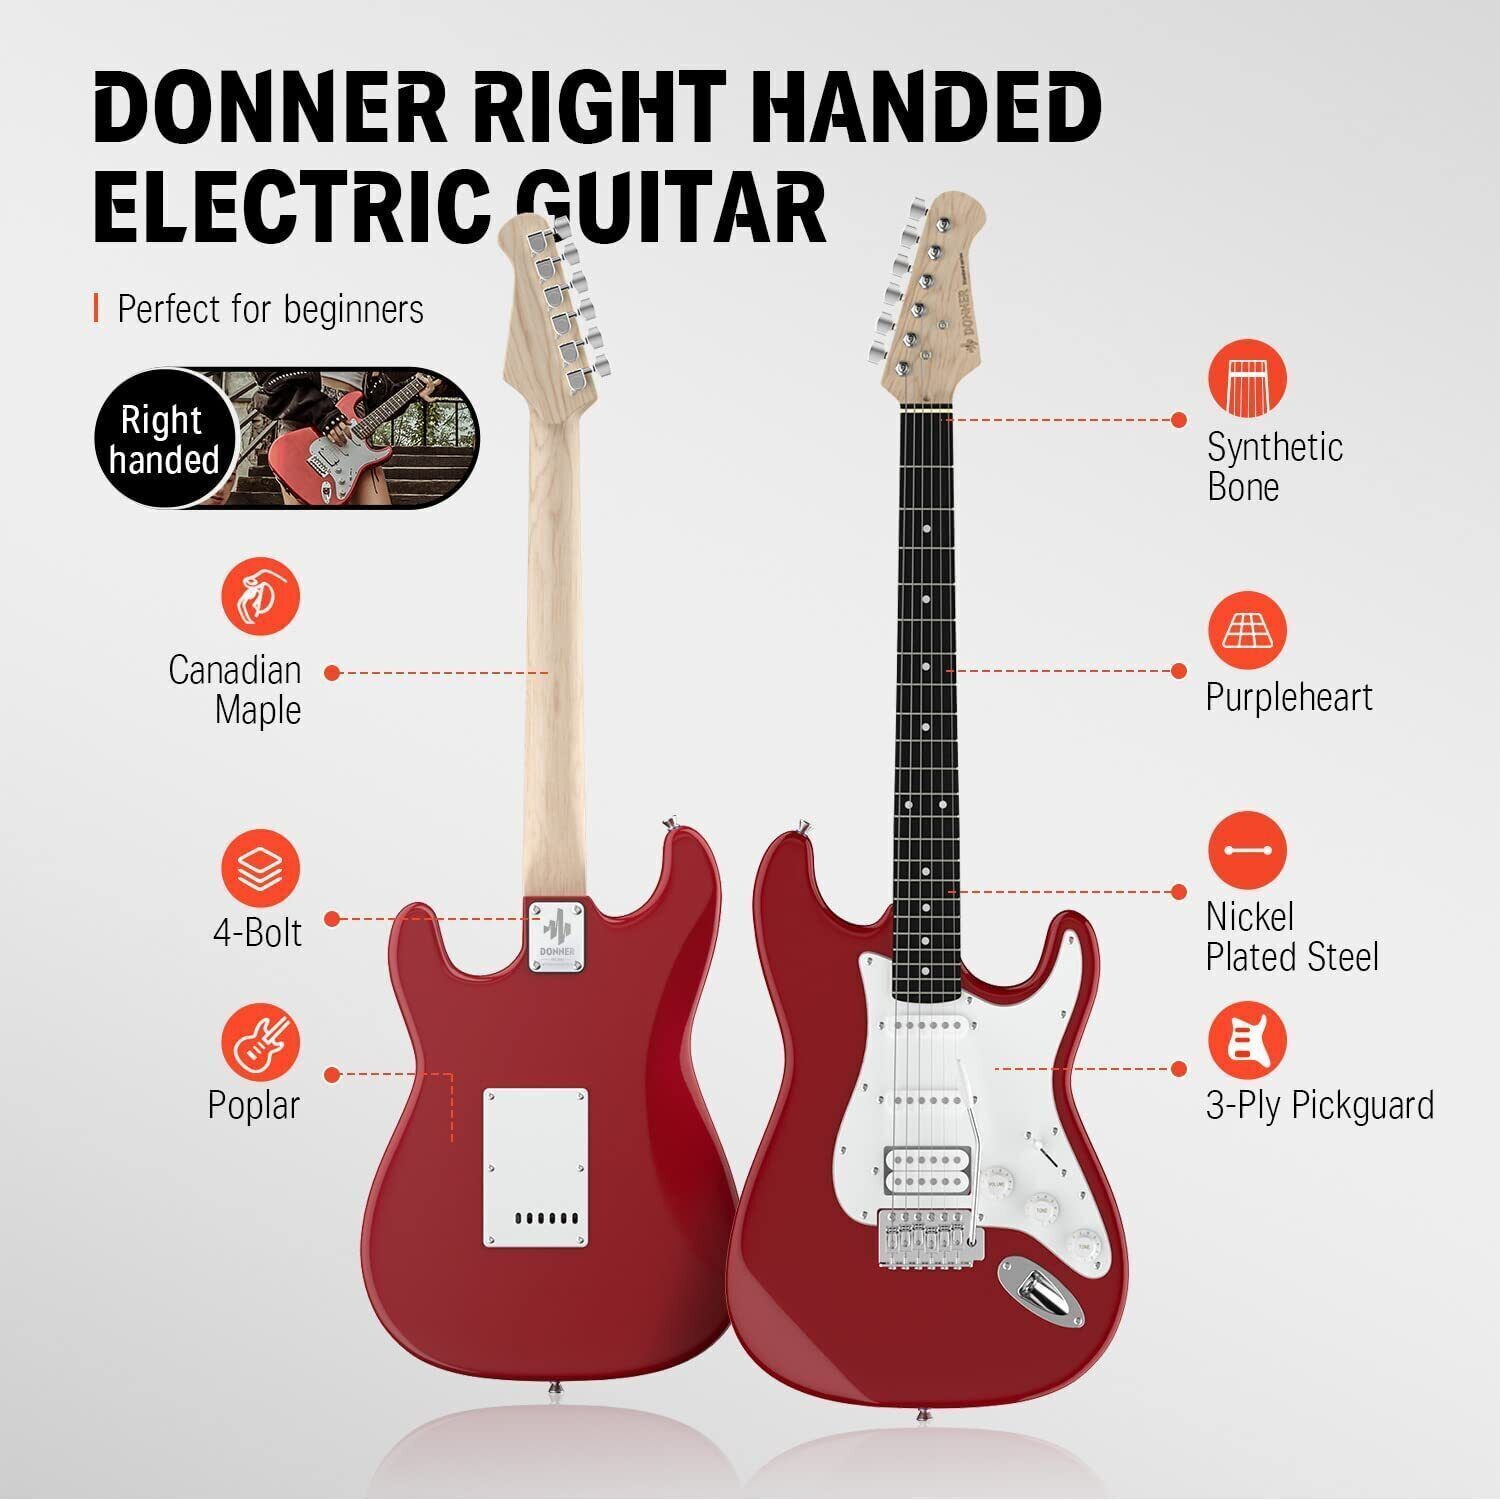 Donner 39" Electric Guitar Beginner Kit Solid Body Full Size Red HSS Pick Up for Starter, with Amplifier, Bag, Digital Tuner, Capo, Strap, String,Cable, Picks DST-102R - image 4 of 13